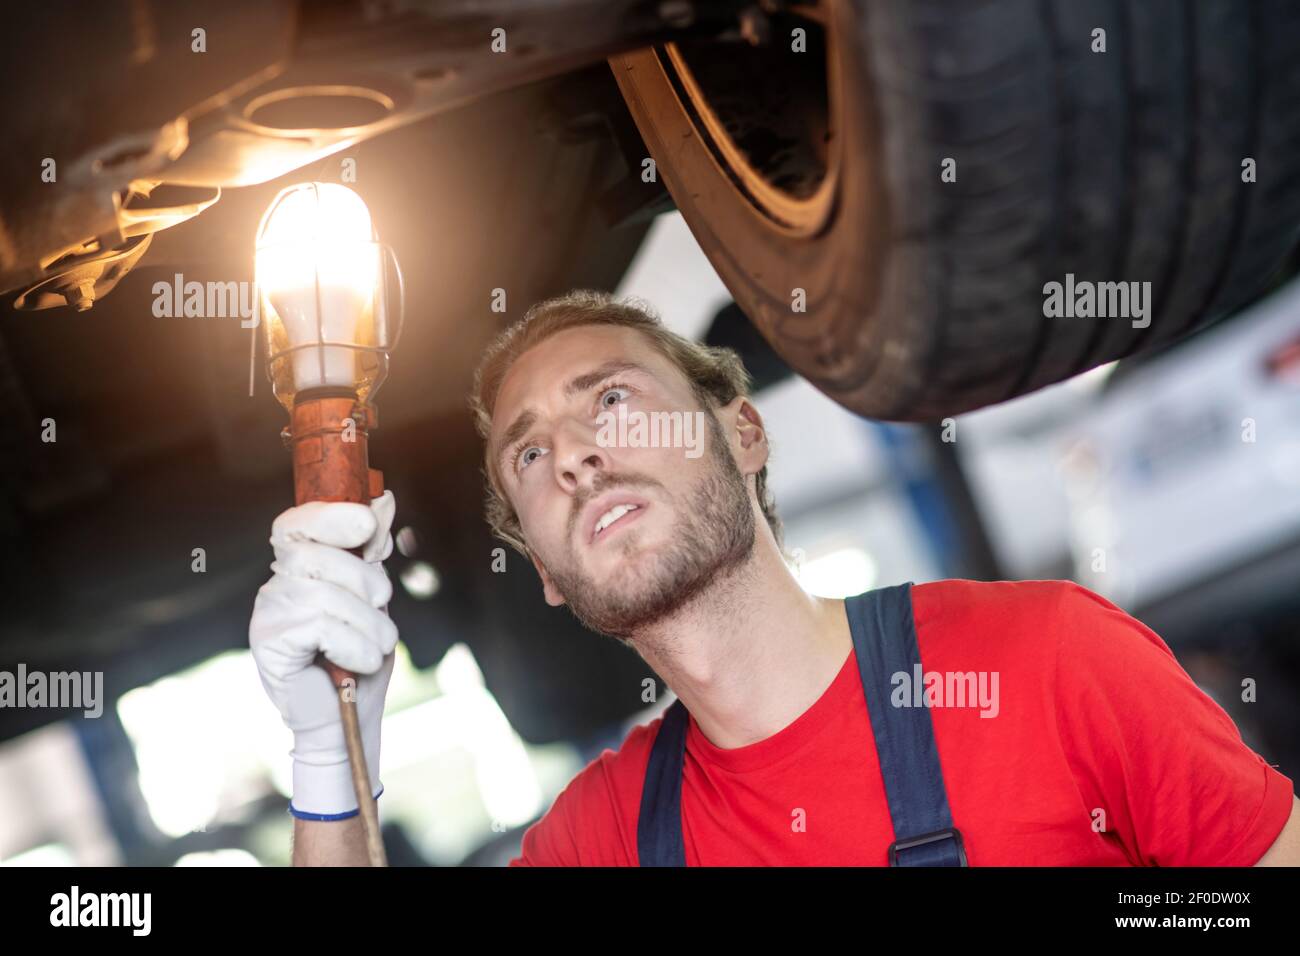 Man concentrating on the bottom of car Stock Photo